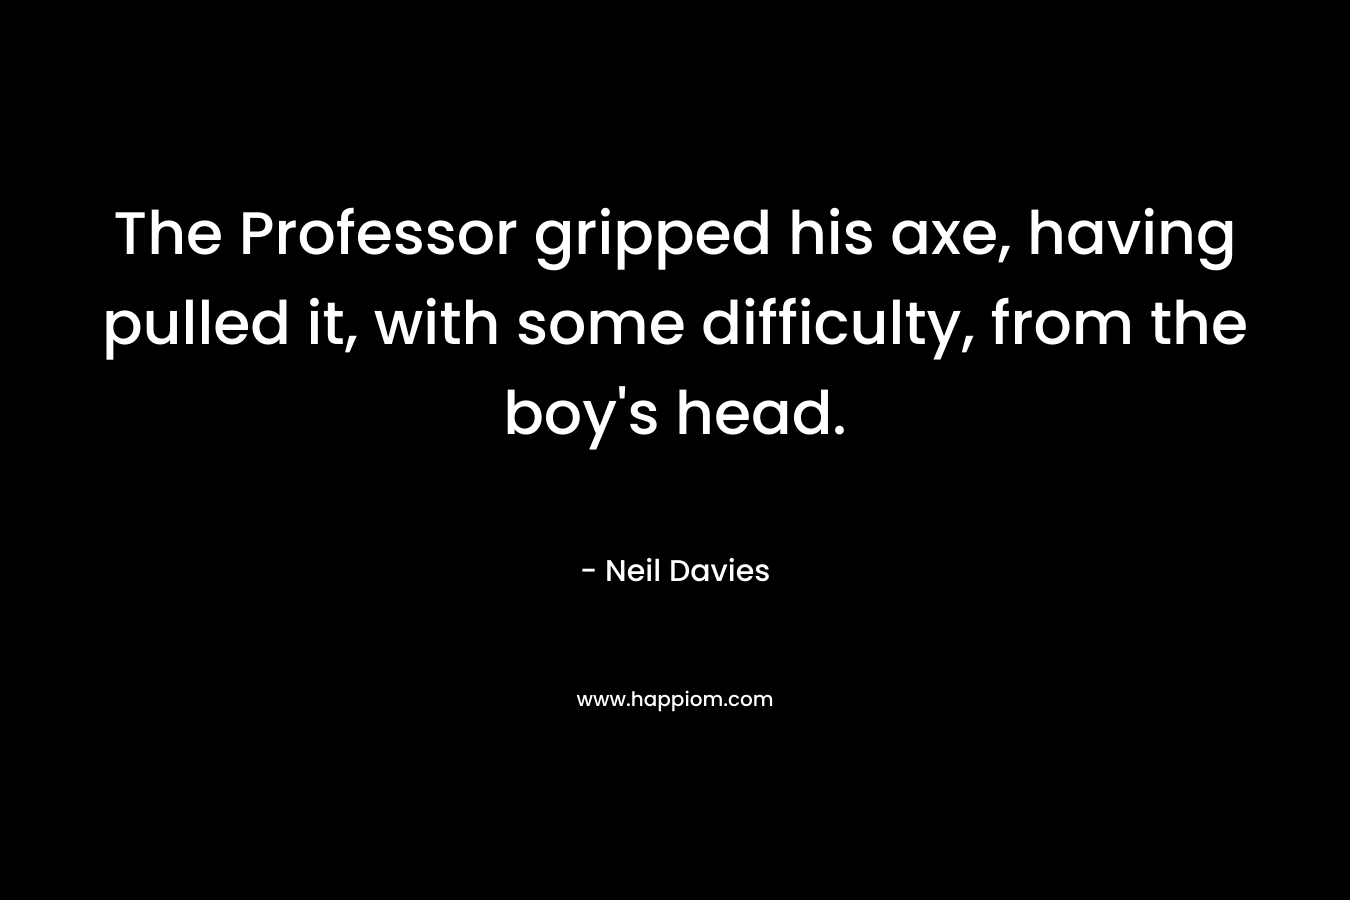 The Professor gripped his axe, having pulled it, with some difficulty, from the boy’s head. – Neil Davies